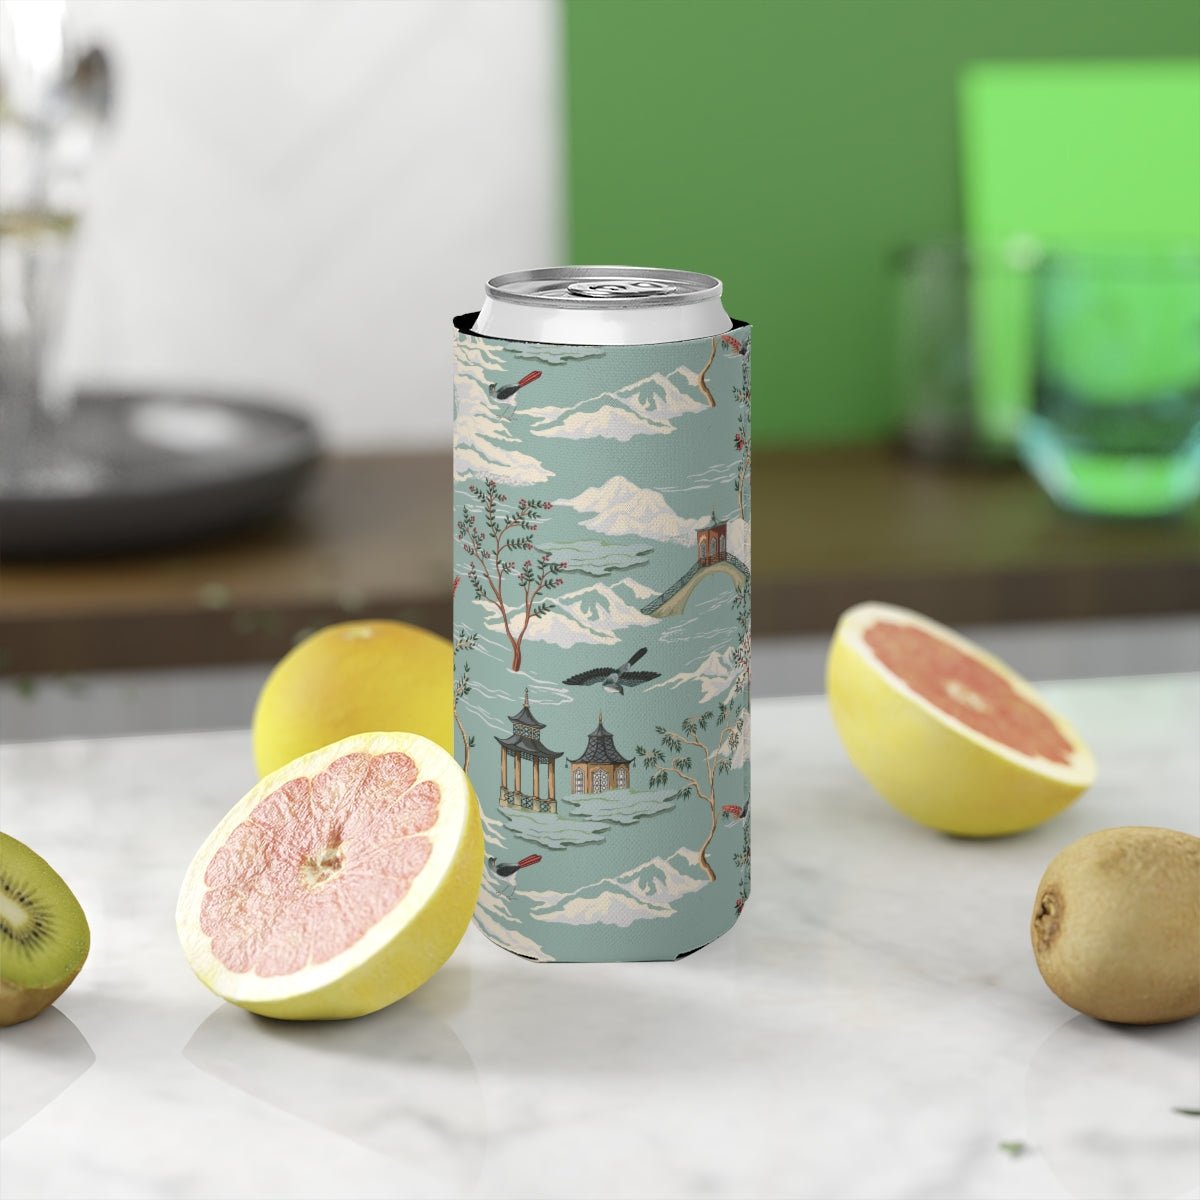 Chinoiserie Chinese Pagoda Slim Can Cooler - Puffin Lime